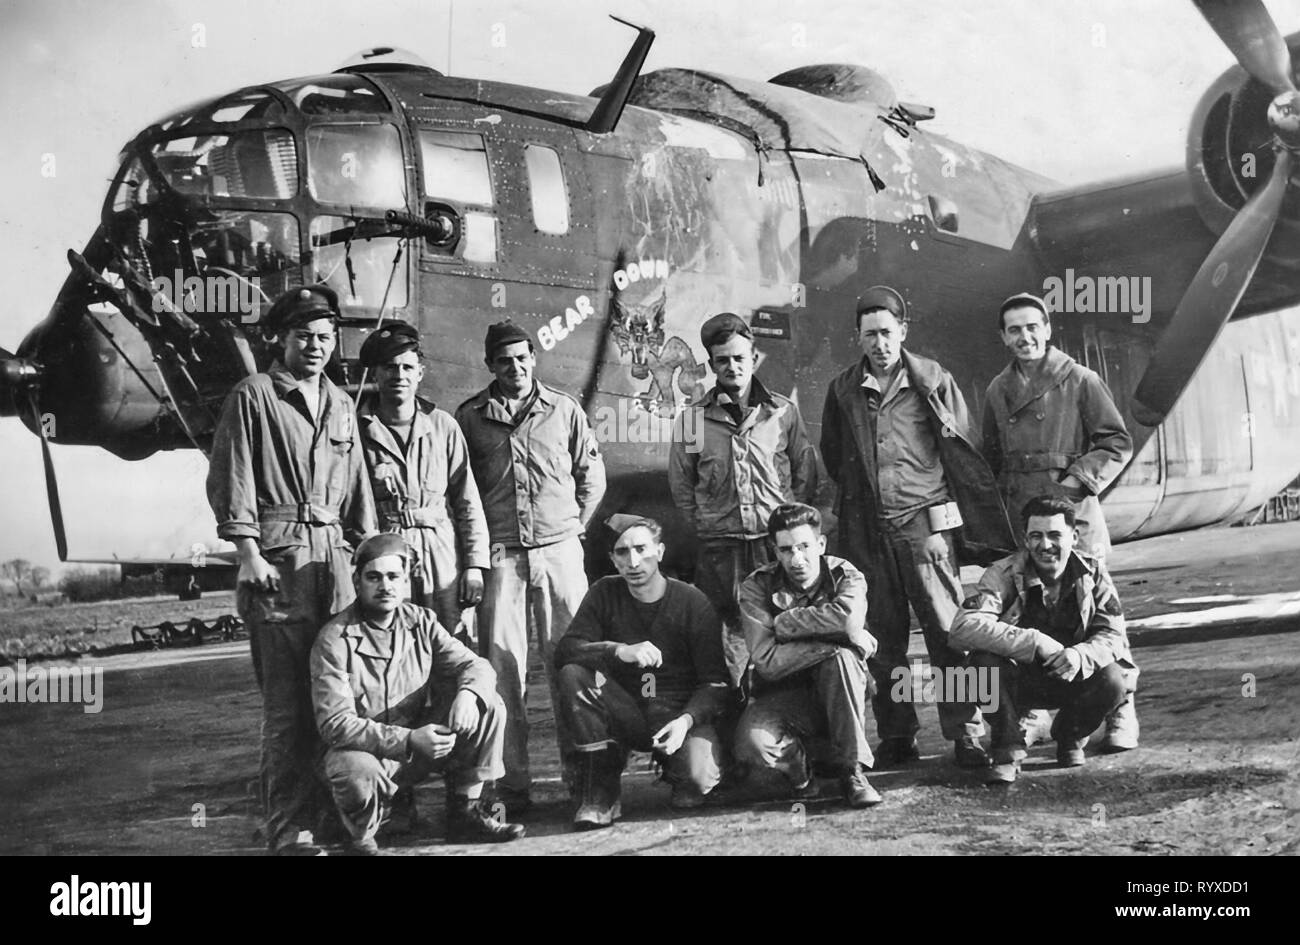 Personal photographs and memorabilia of fighting Americans during the Second World War. B-25 Mitchell medium bomber aircrew and nose art. Stock Photo